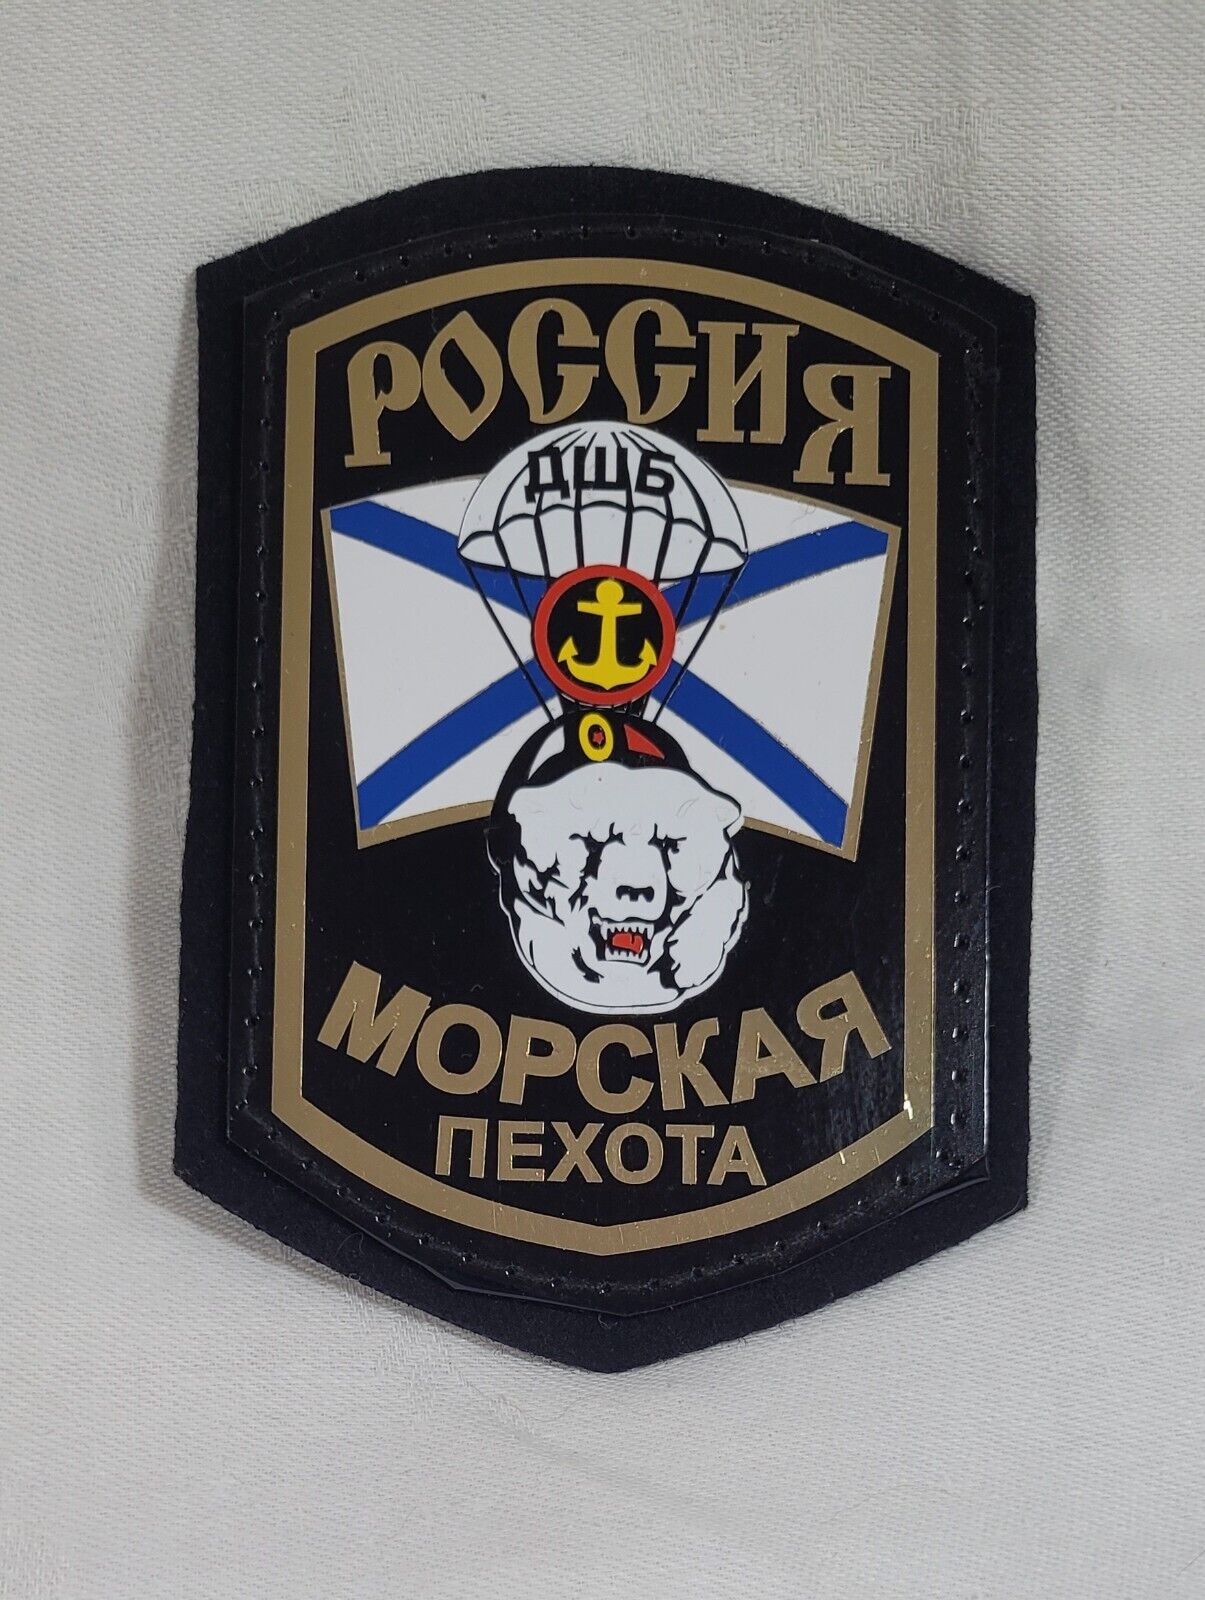 RUSSIAN NAVAL INFANTRY MARINES SPECIAL PRESENTATION POST SERVICE RUSSIA PATCH